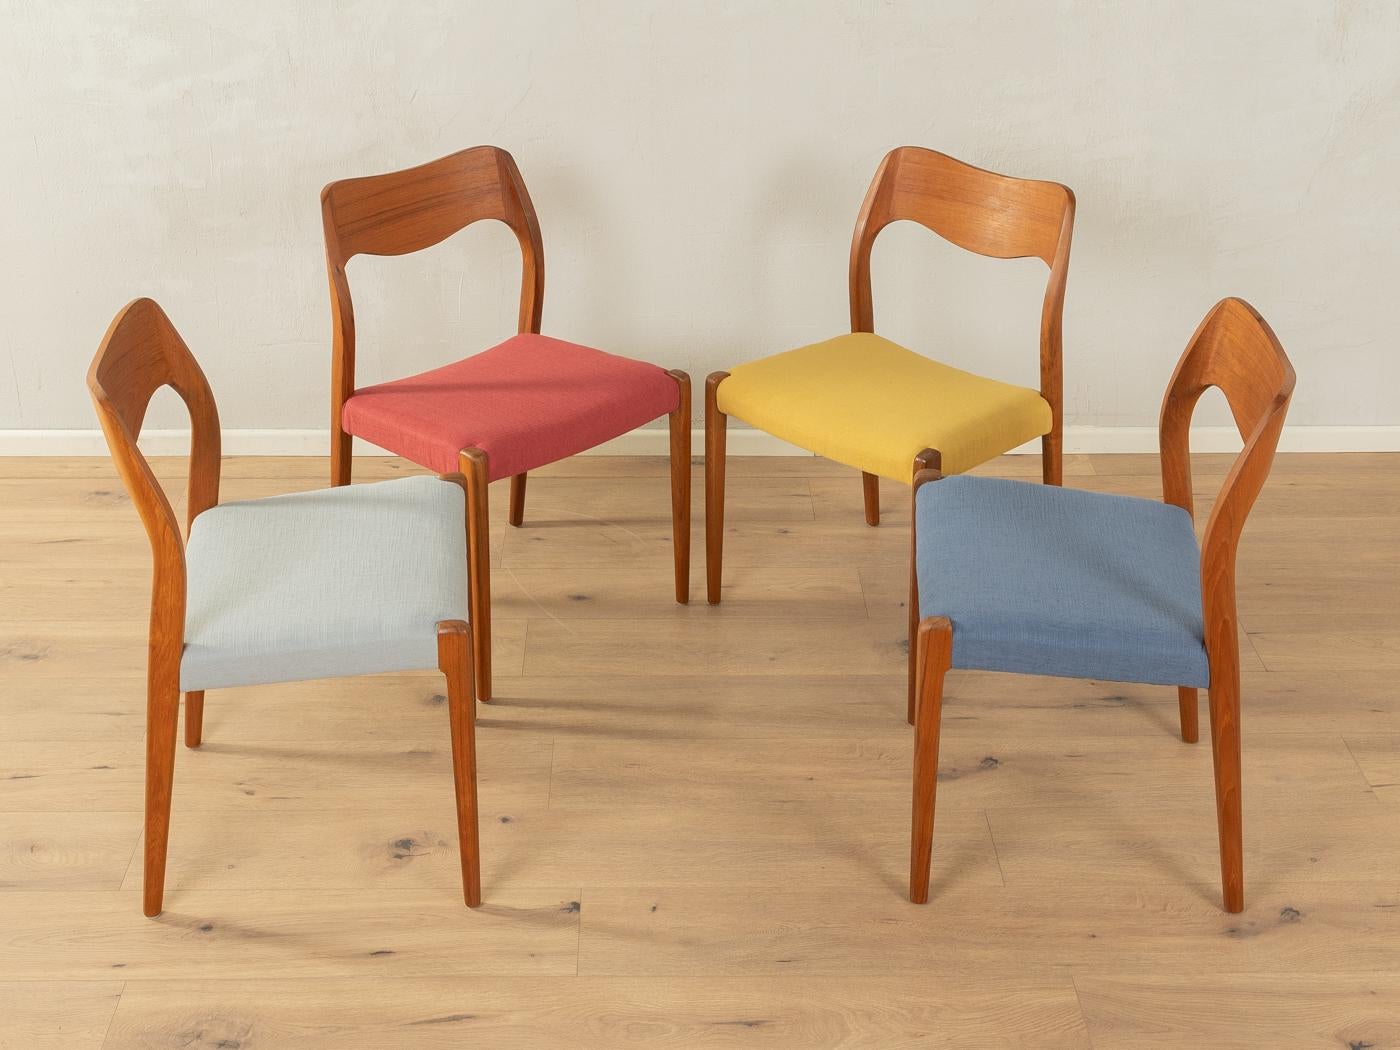 Wonderful chair set from the 1950s by Nils O. Møller, consisting of six 